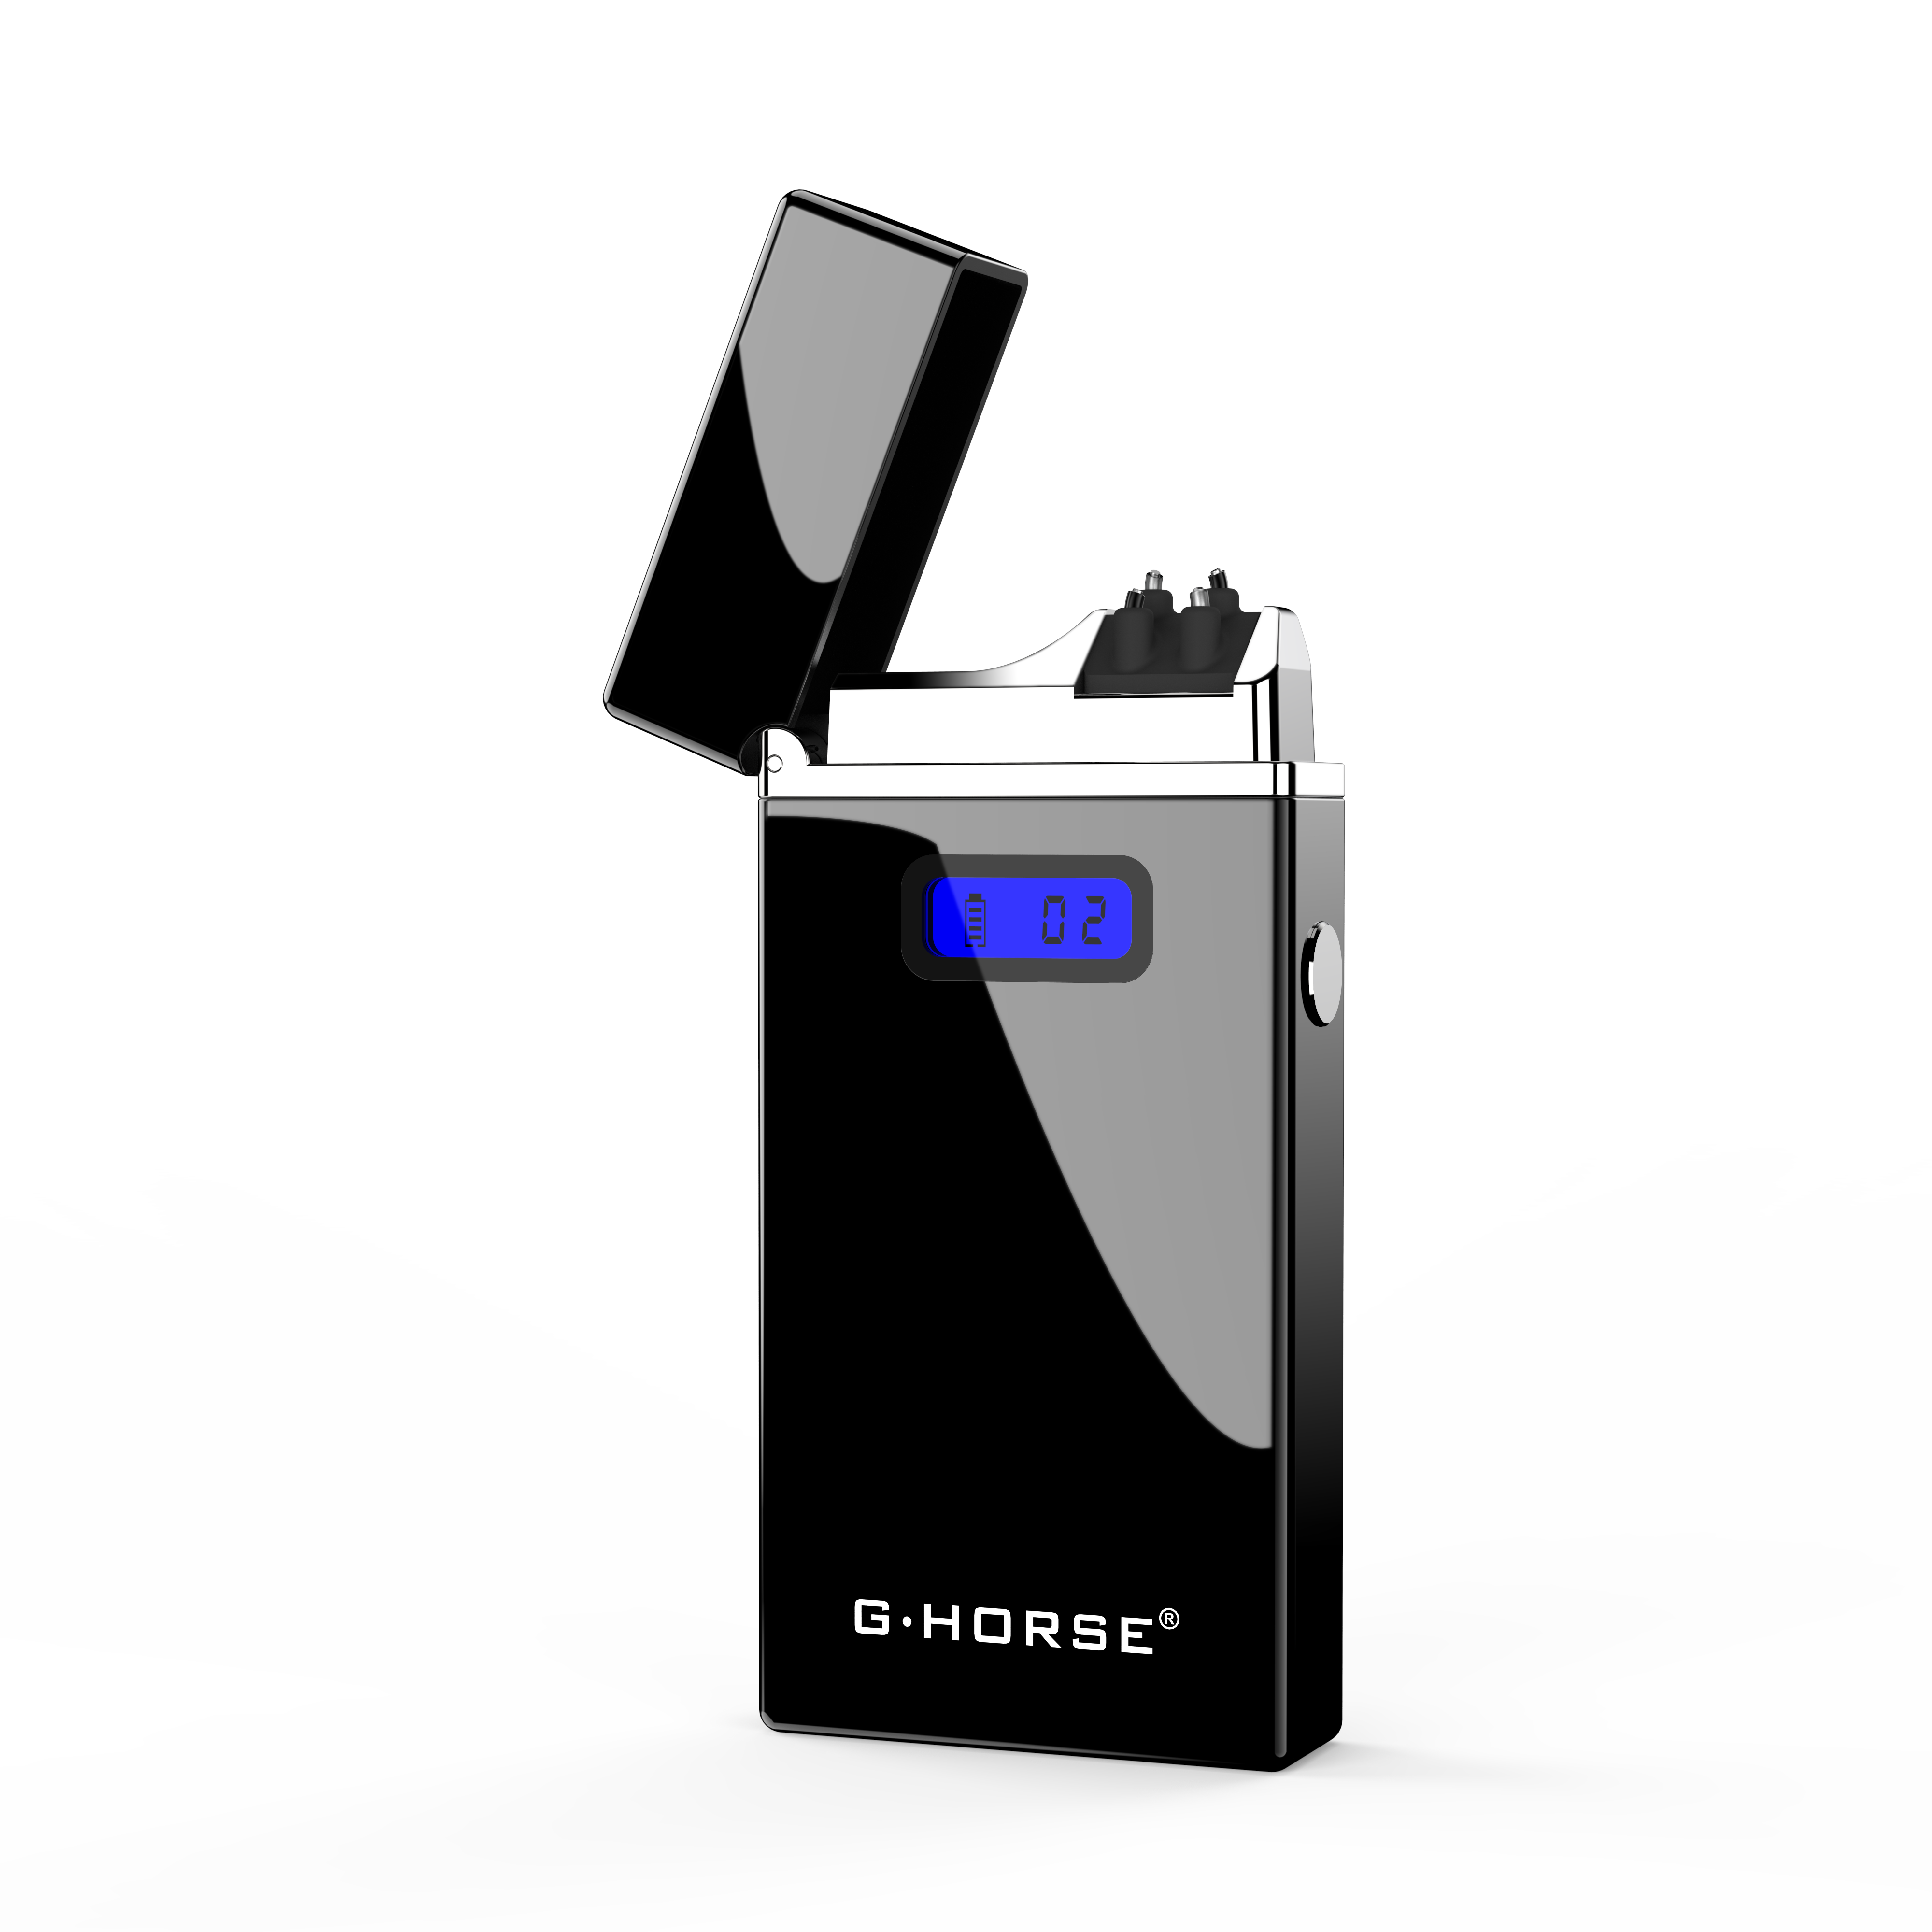 New professional design usb electric double arc lighter with competitive price Australia UK Canada